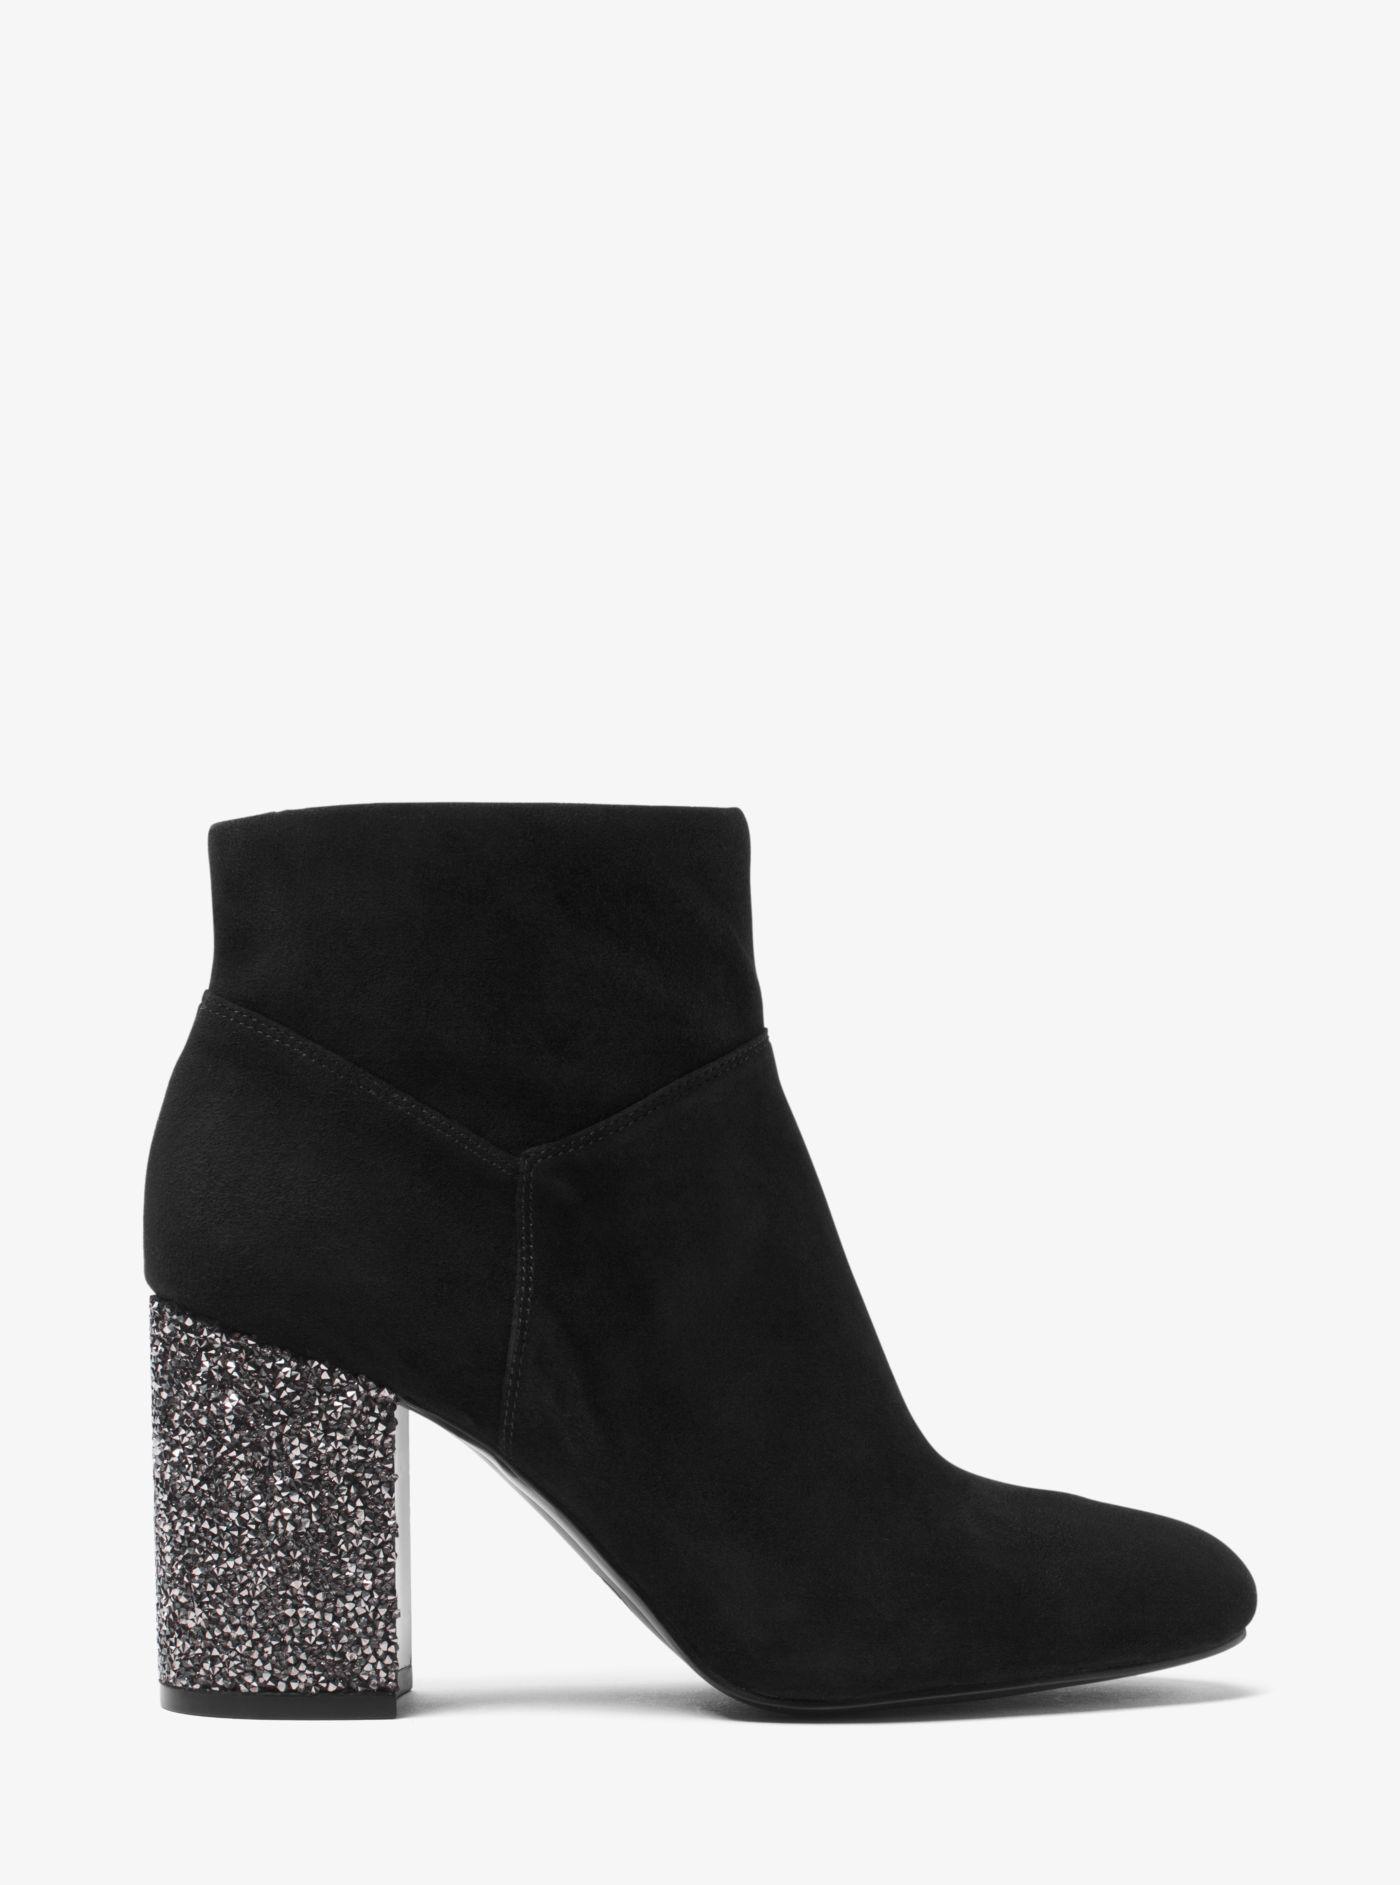 Michael Kors Cher Suede Ankle Boot 